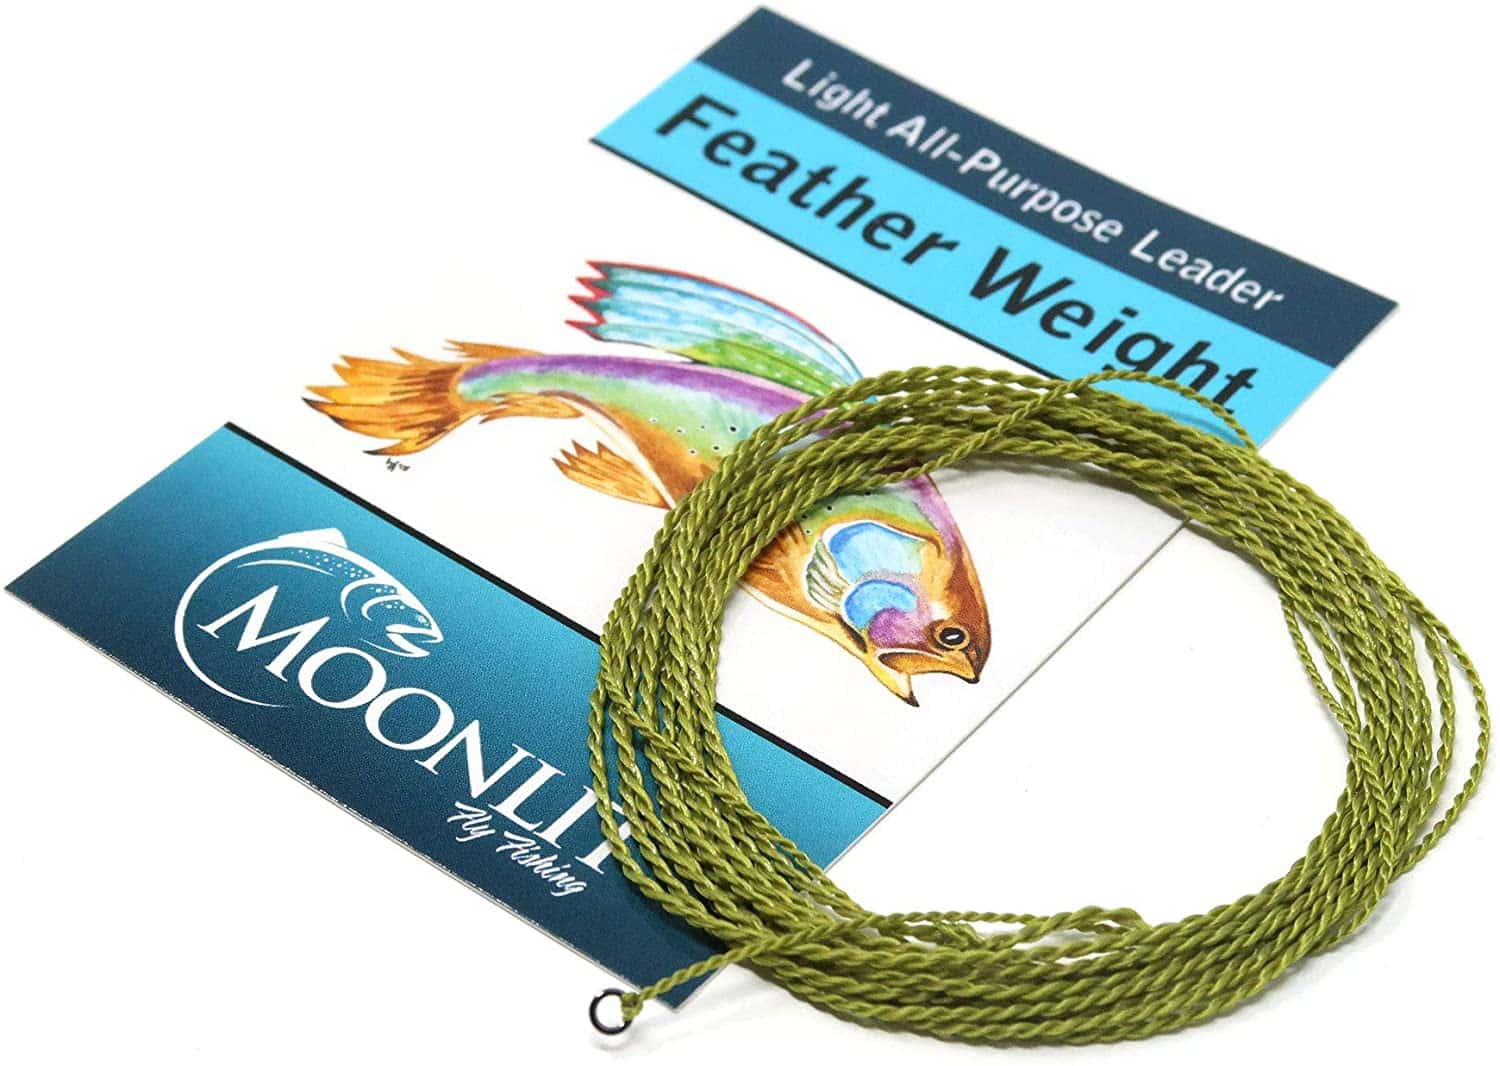 Fly fishing leaders are available in a variety of sizes